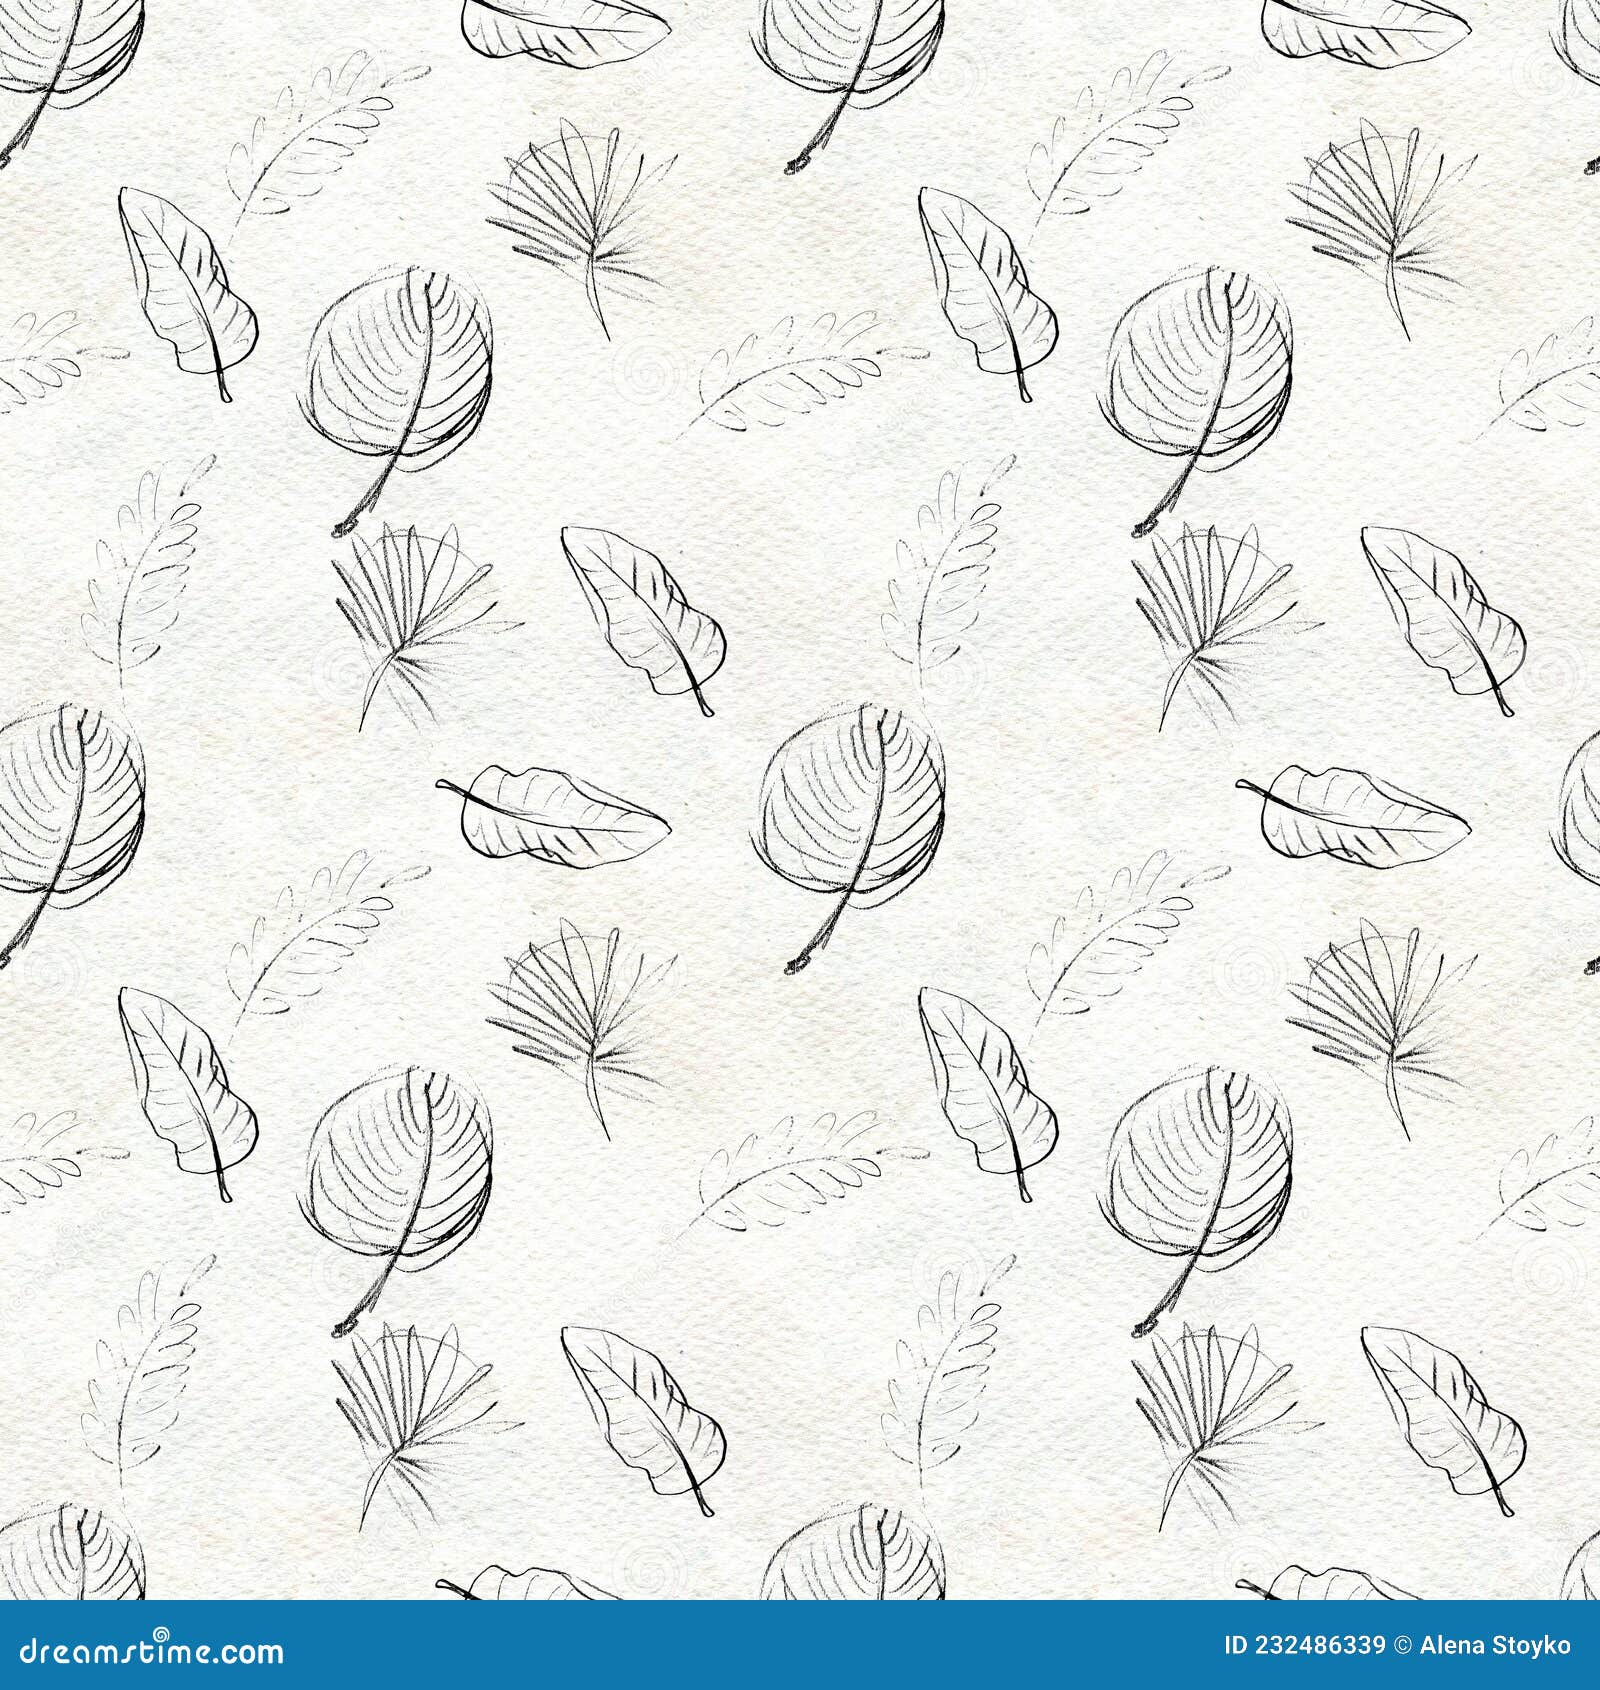 Black and White Graphic Tropical Leaves Seamless Pattern. Stock Image